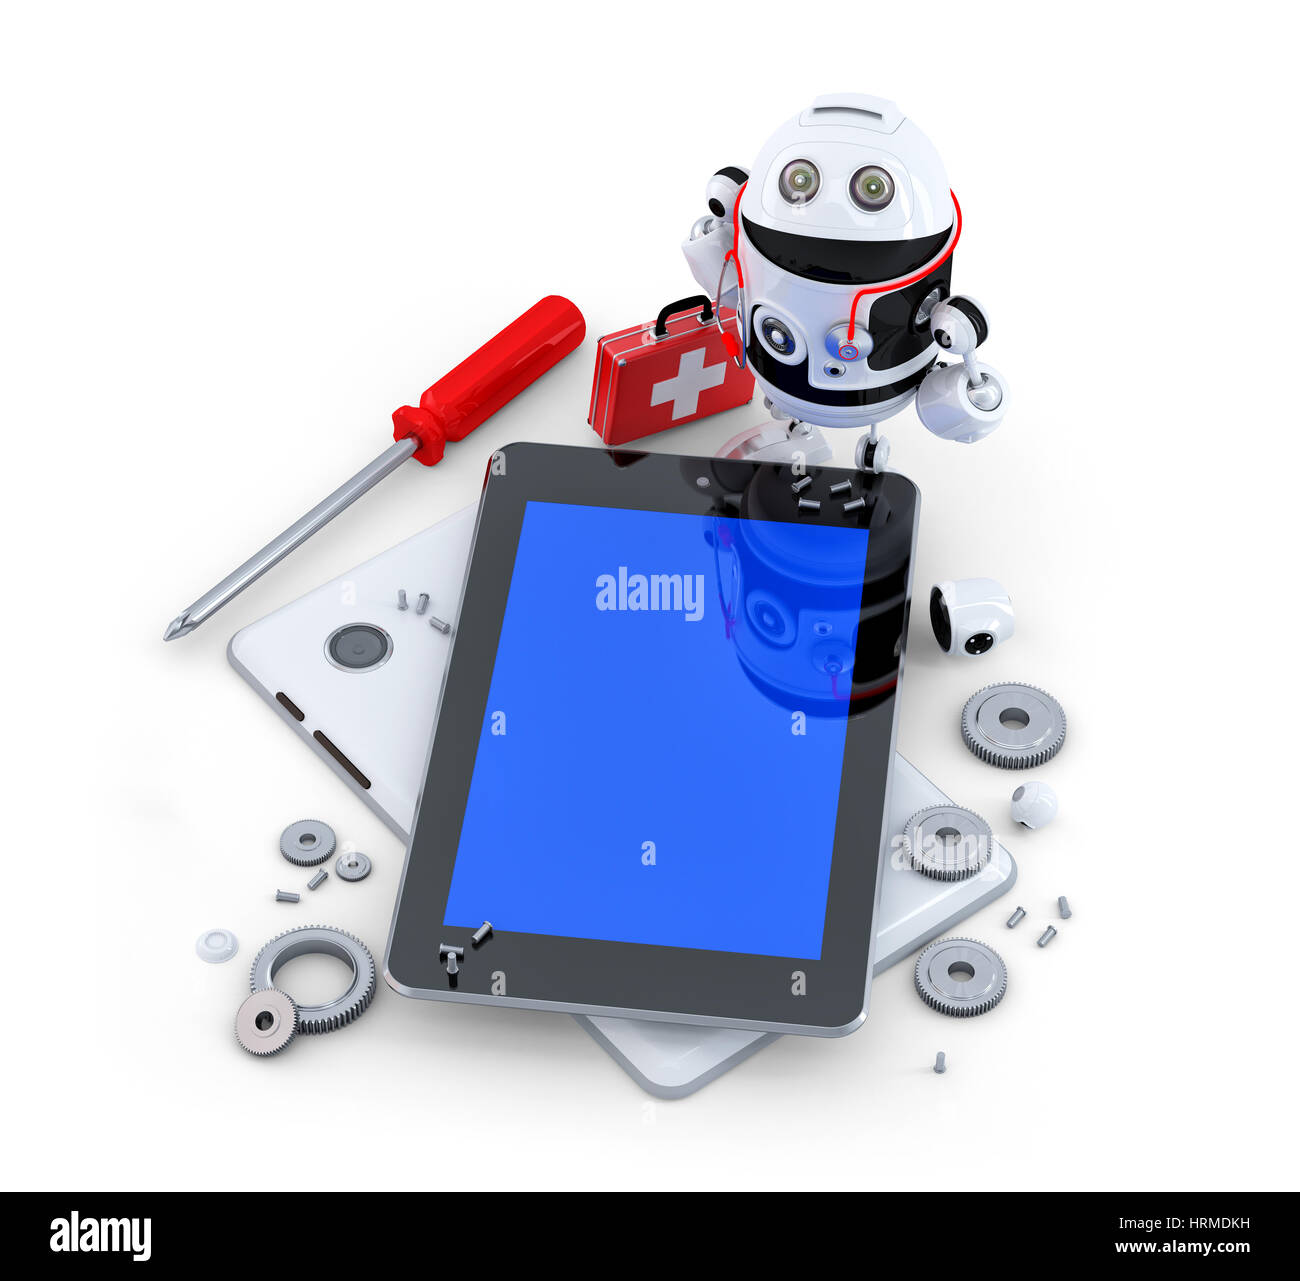 Robot repairing tablet computer. Technology concept Stock Photo